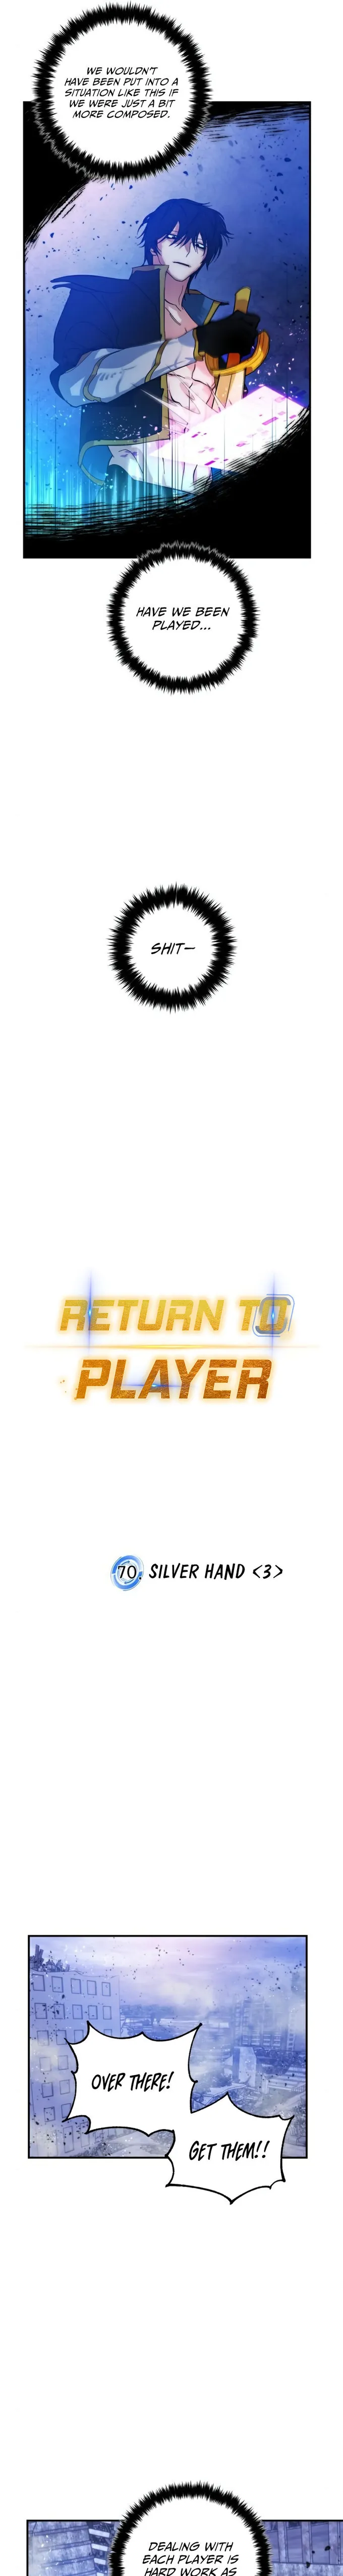 Return To Player - Page 3